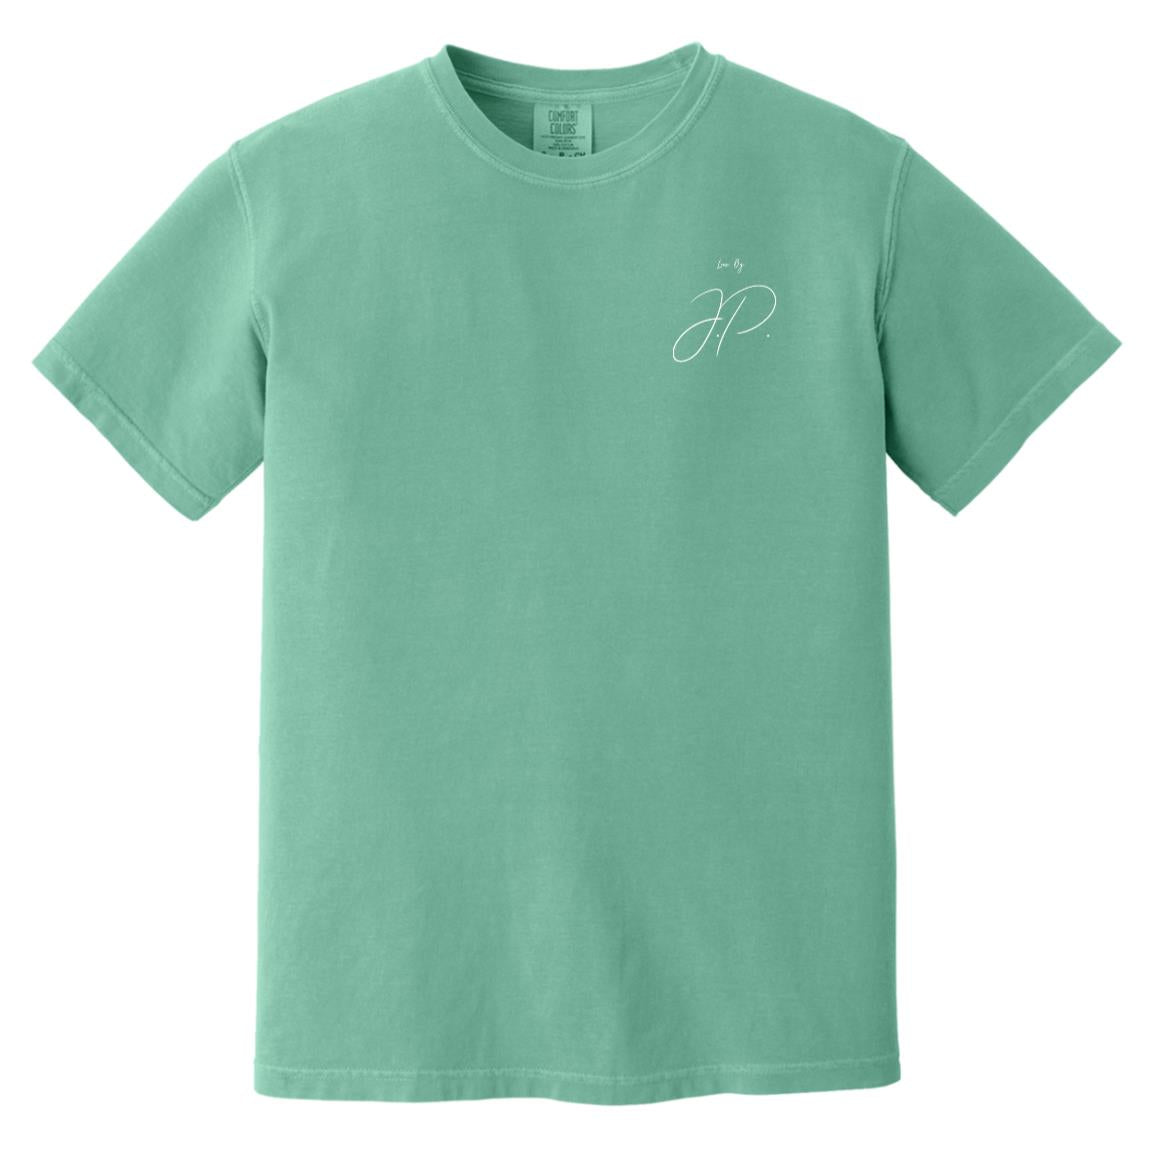 Lux. Heavyweight T-Shirt - Seafoam - Colors Edition